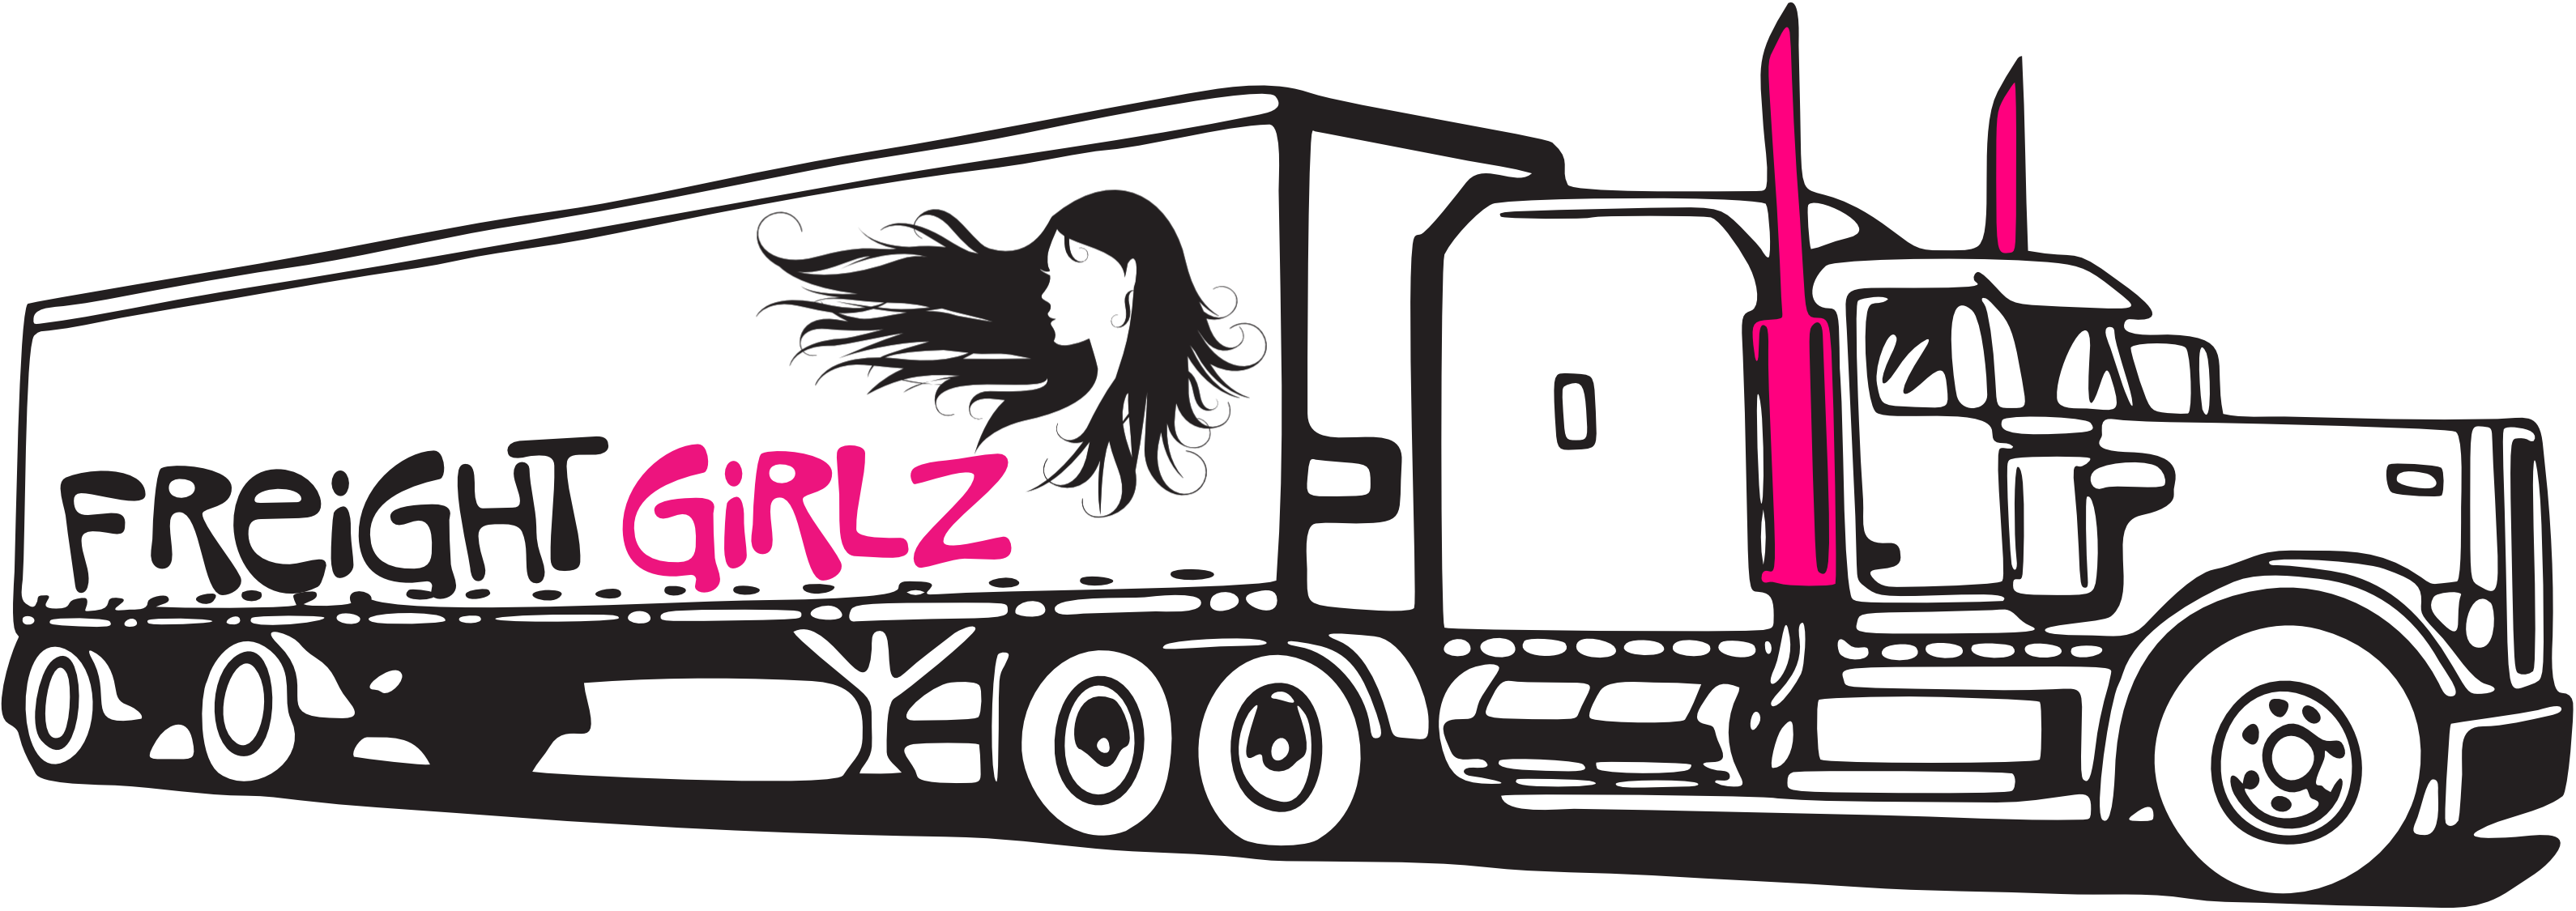 Freight Girlz Launches Live Rate Per Mile Data by Equipment Type and Publishes Their Dispatch Log on Their Website for Customer Transparency